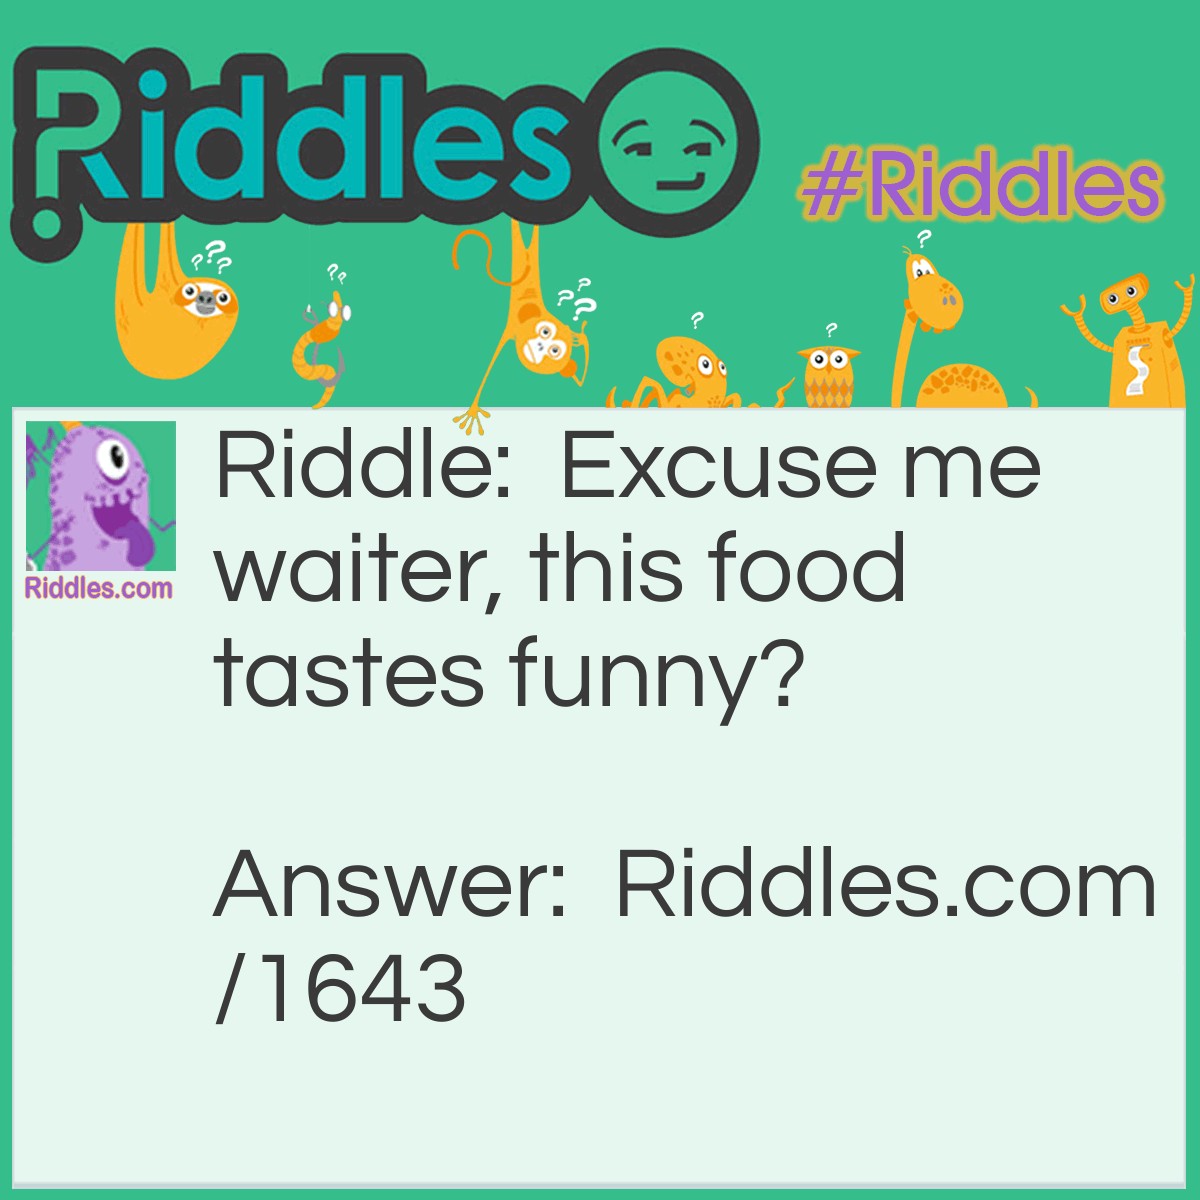 Riddle: Excuse me, waiter, this food tastes <a title="funny riddles" href="../../../funny-riddles">funny</a>? Answer: Then why aren't you laughing?